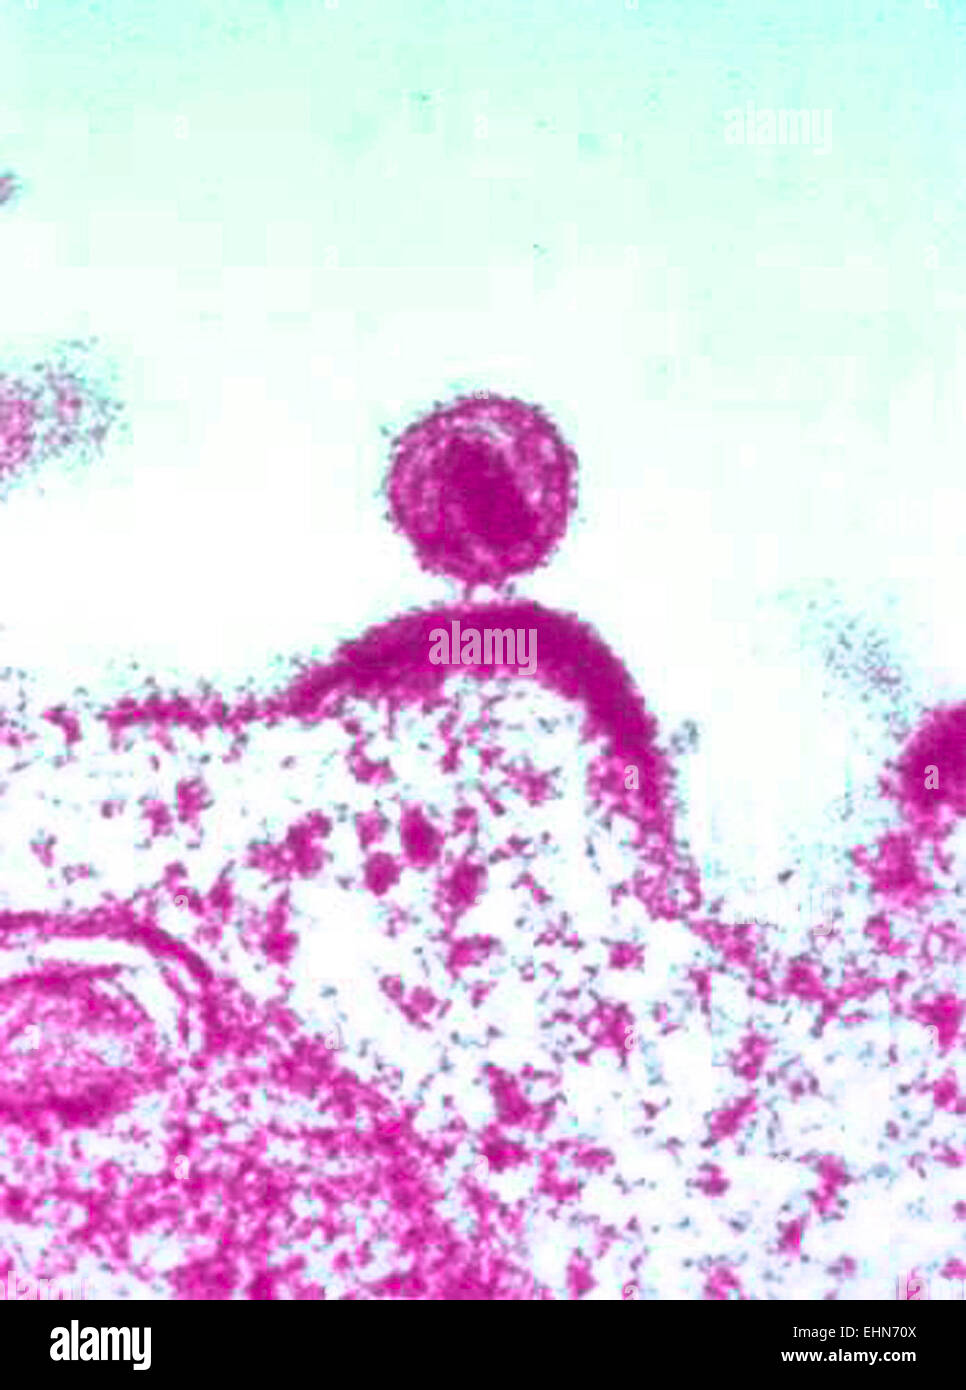 Detail of one human immunodeficiency virus (HIV) virus particle, or virion, Transmission Electron Micrograph (TEM). Stock Photo